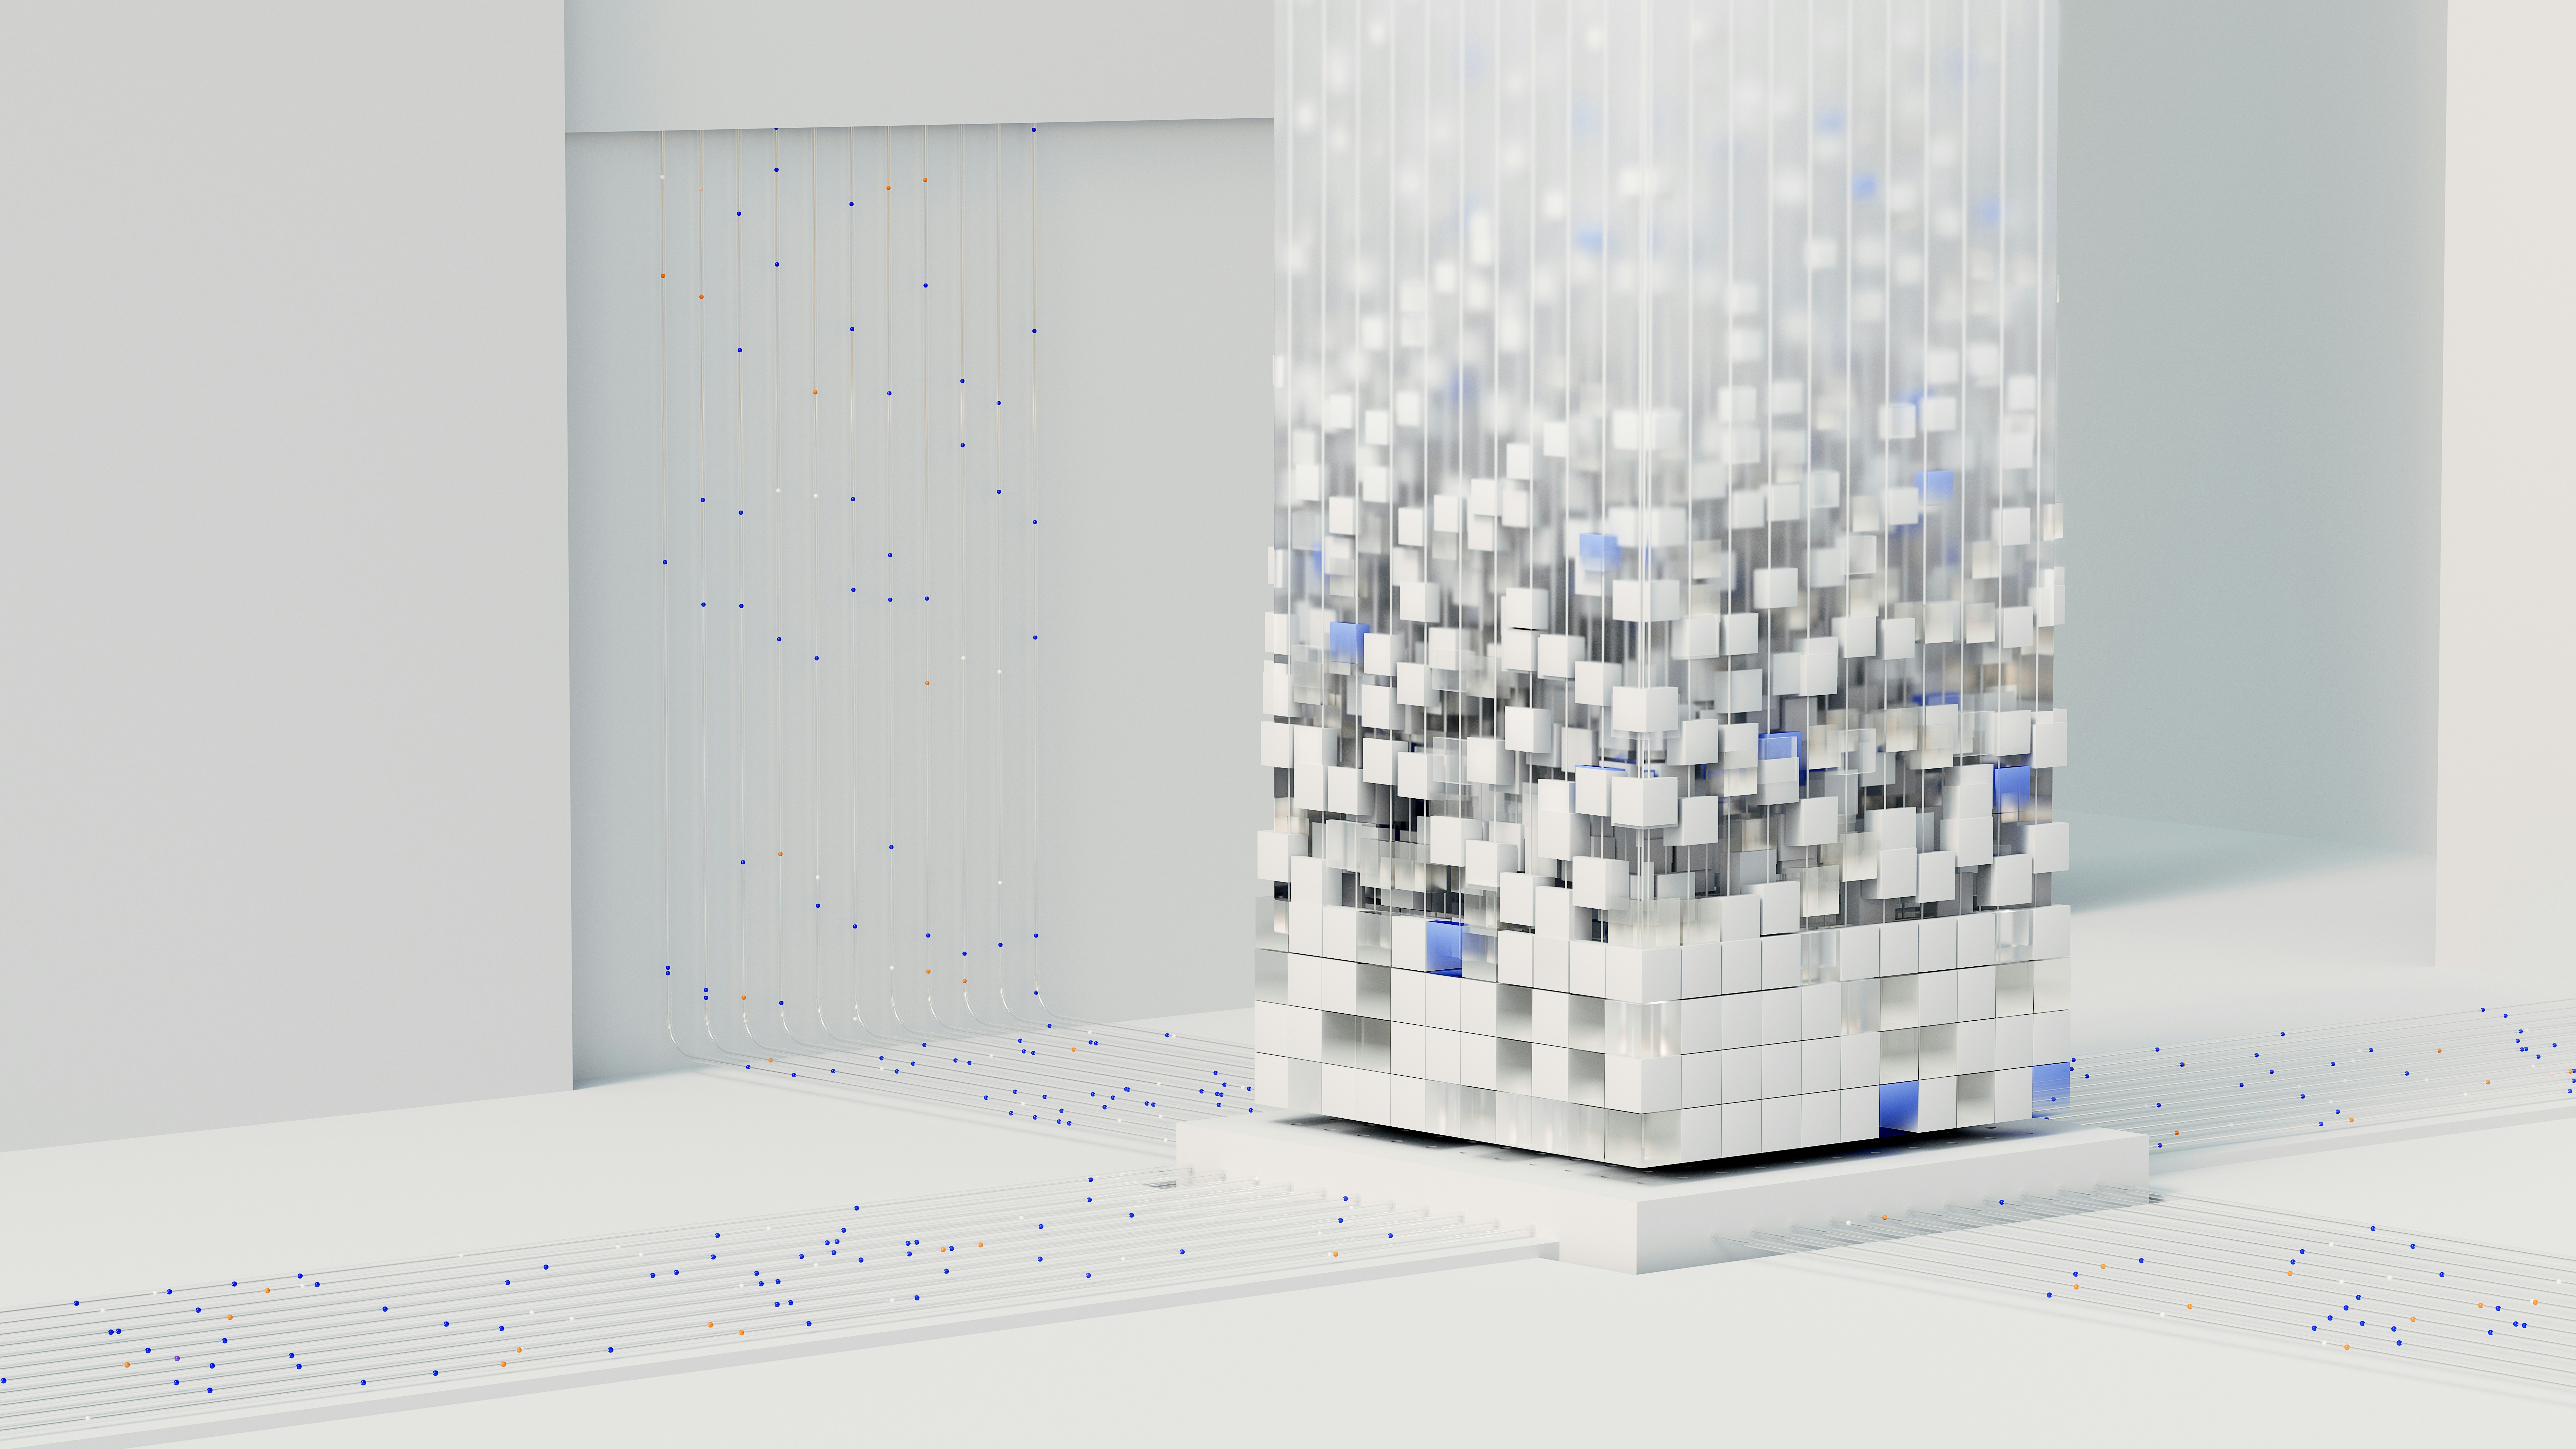 Abstract 3D visualization of data processing with a digital structure of pixelated cubes and flowing lines representing information streams, symbolizing advanced computing technology and AI data analysis on a white background.